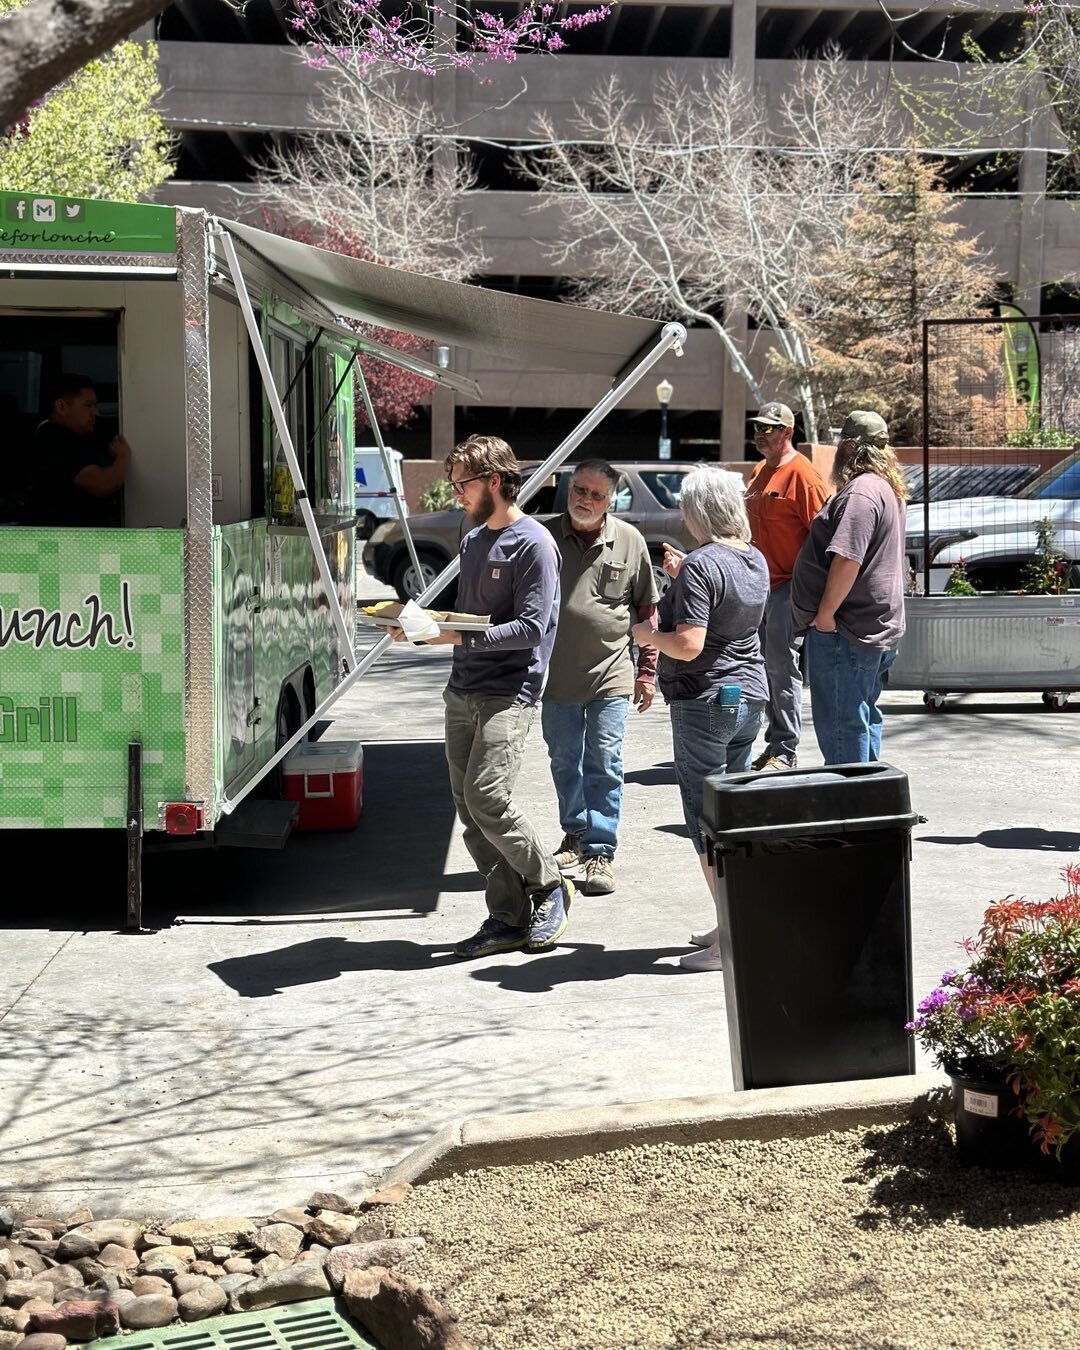 @Timeforlonche will be back Saturday at The Plant from 11am - 2pm. Please bring your appetites! Yummy Mexican food. #theplantprescott #nootherplacelikeitinprescott #prescottfoodtrucks #prescottfood